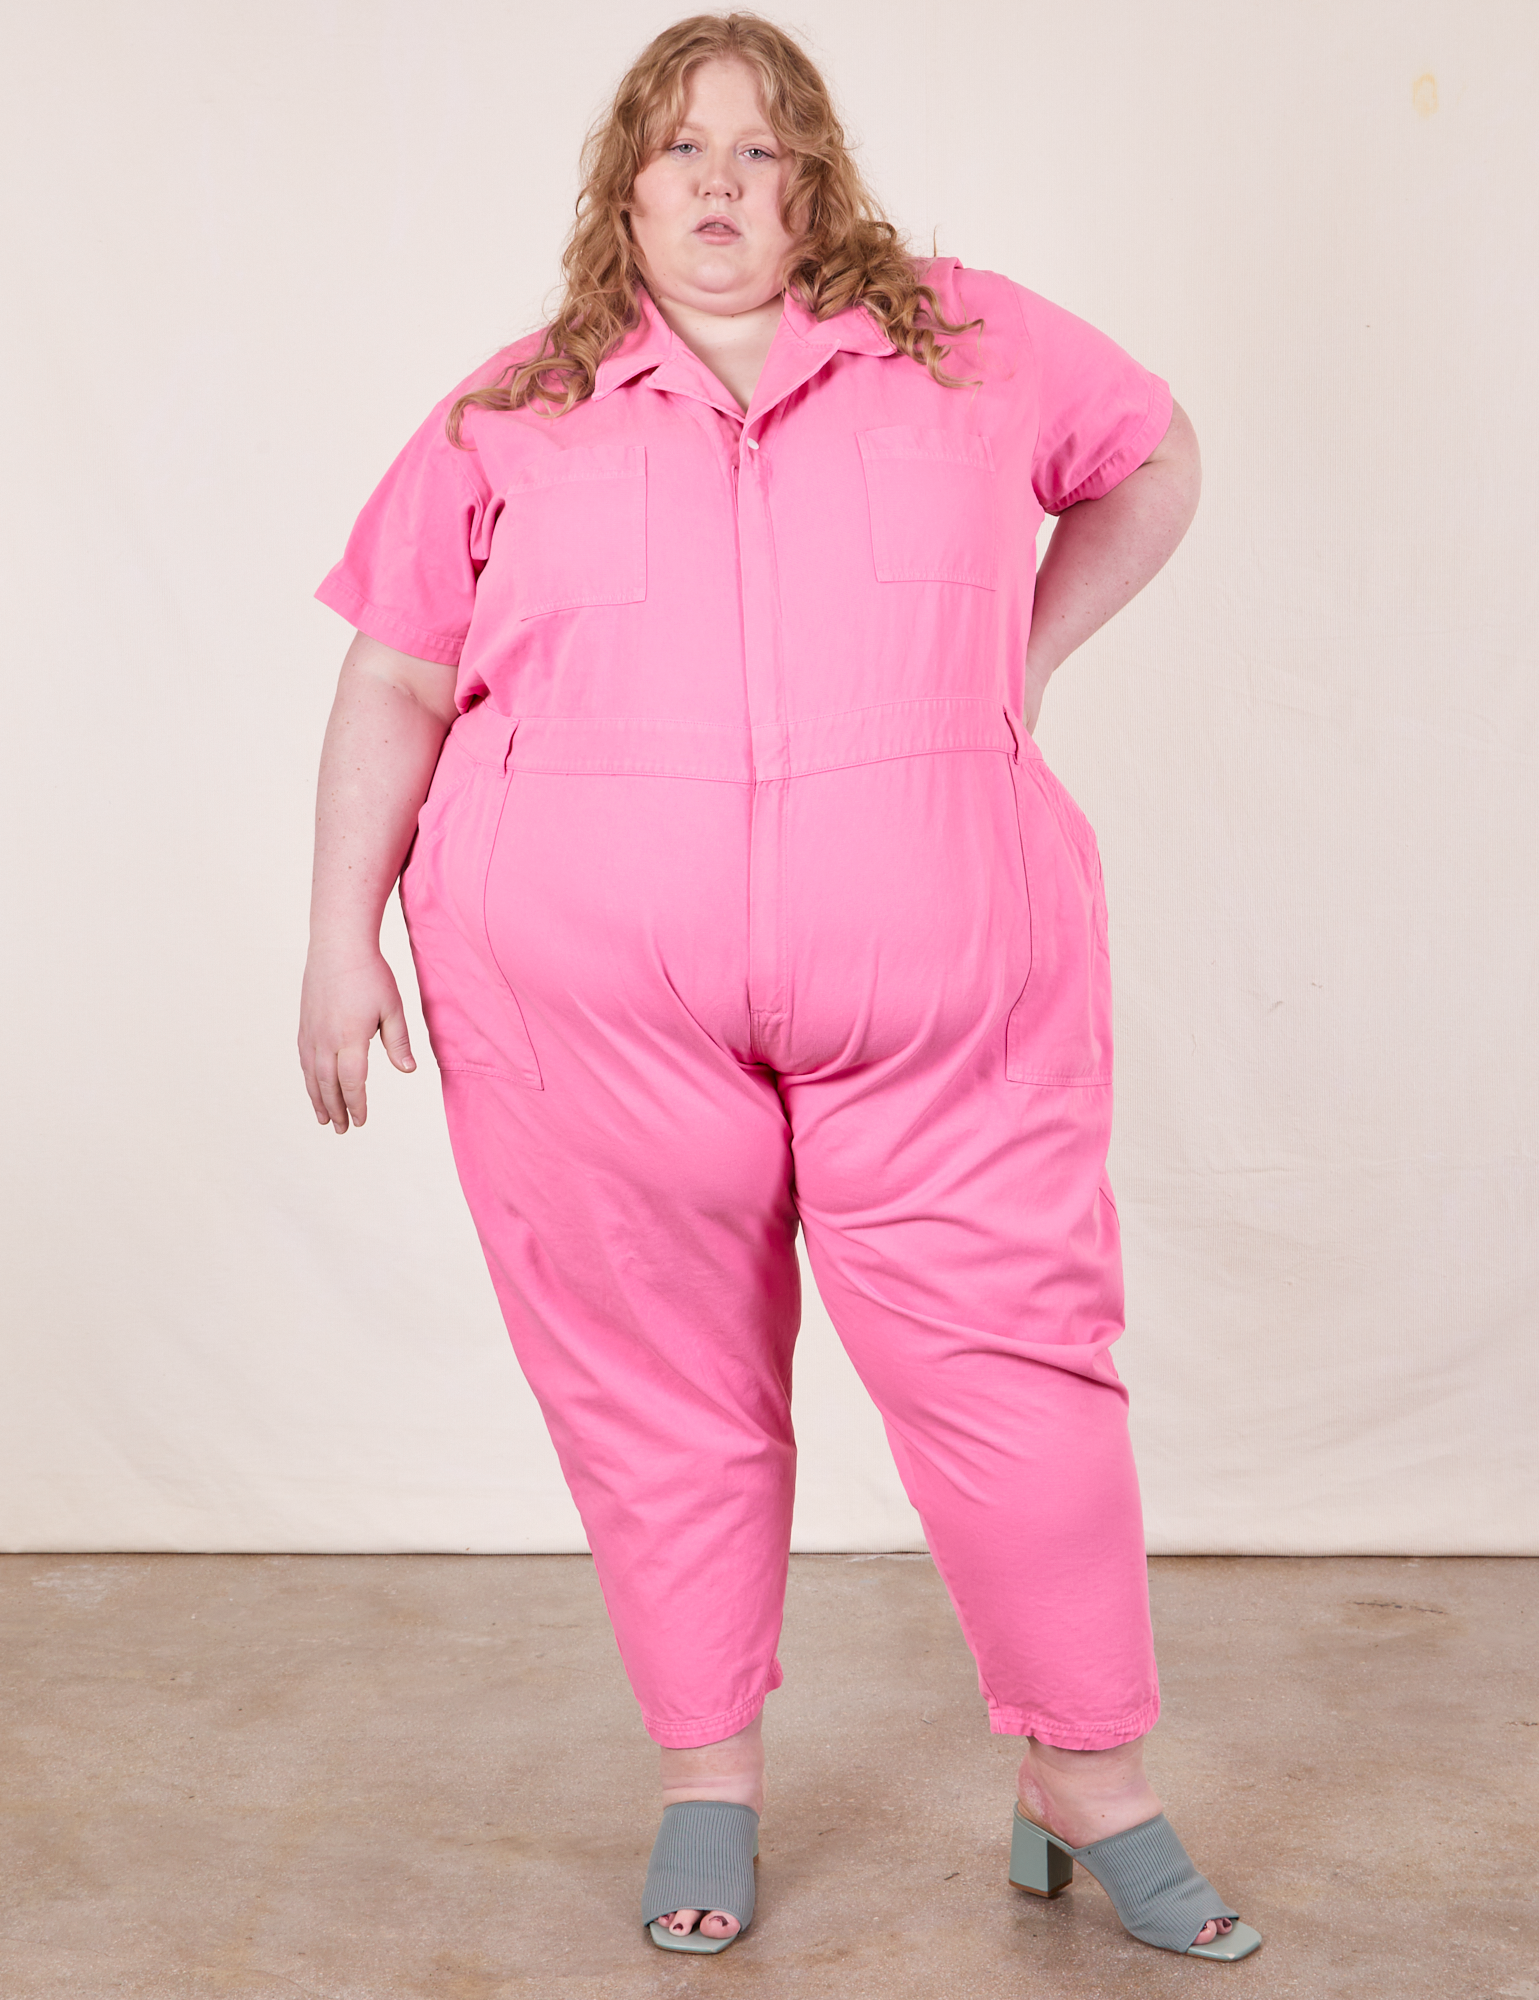 Catie is 5&#39;11&quot; and wearing size 5XL Short Sleeve Jumpsuit in Bubblegum Pink